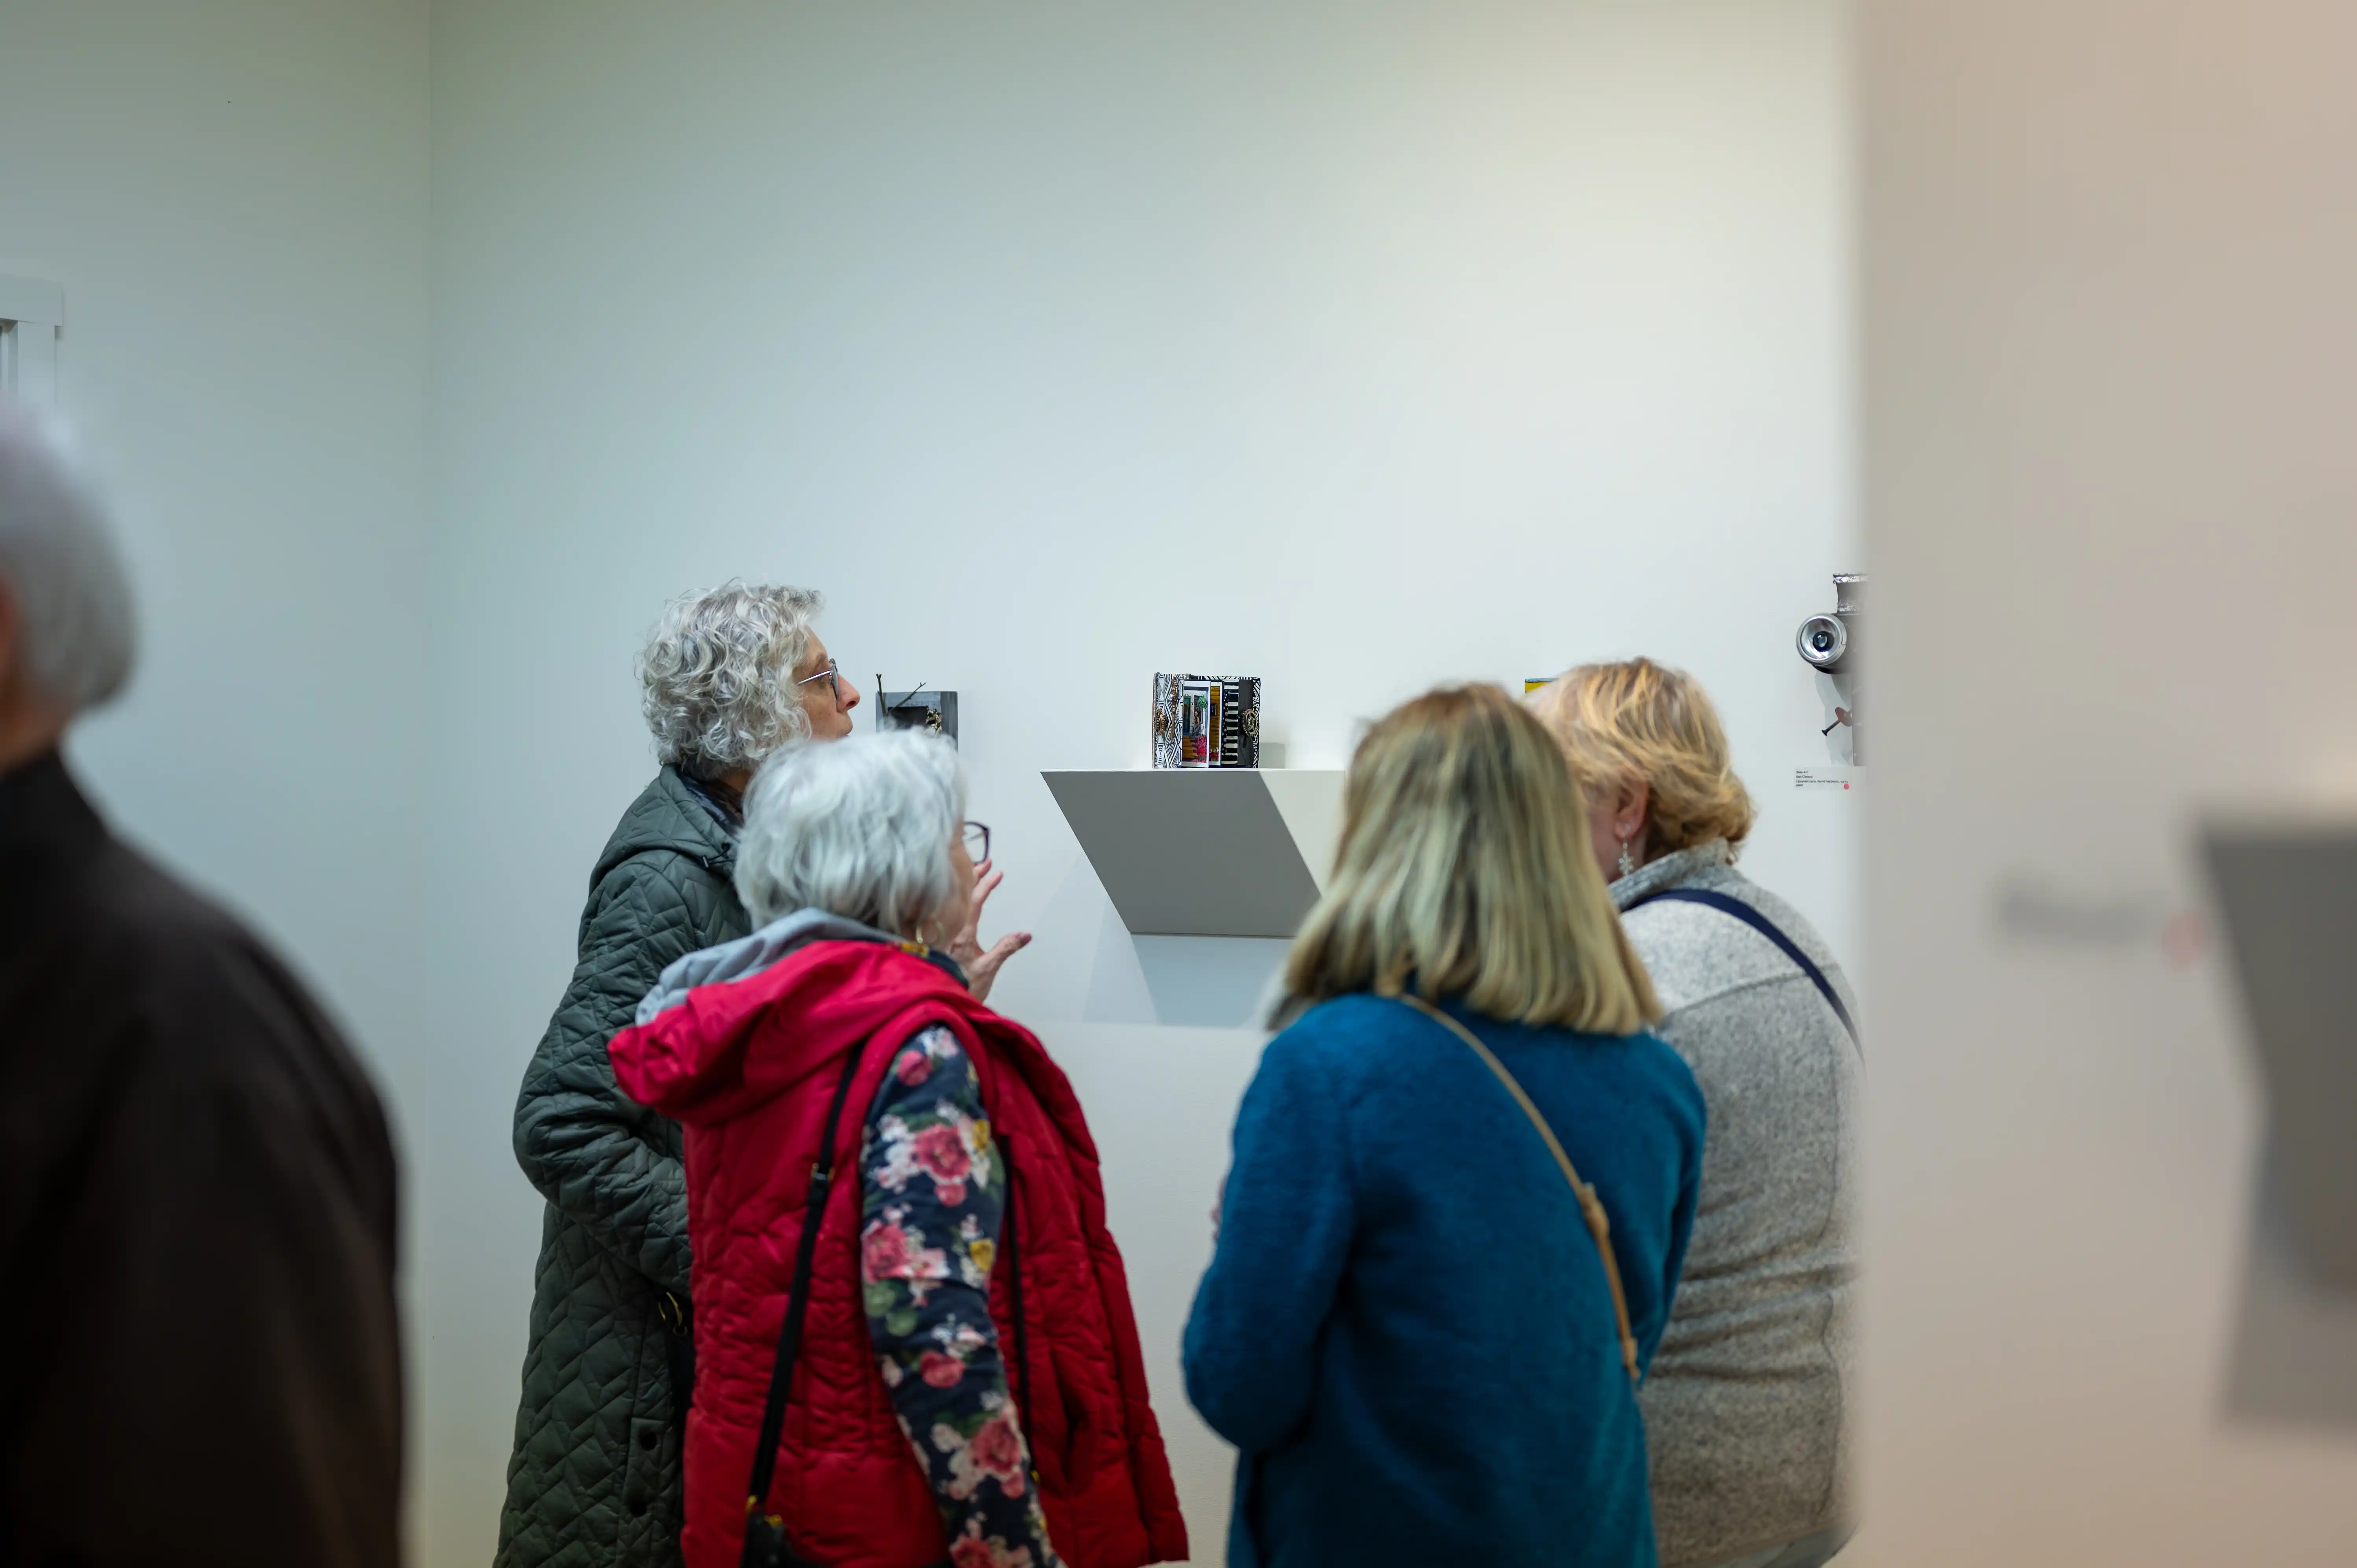 Group of people viewing art in a gallery setting.